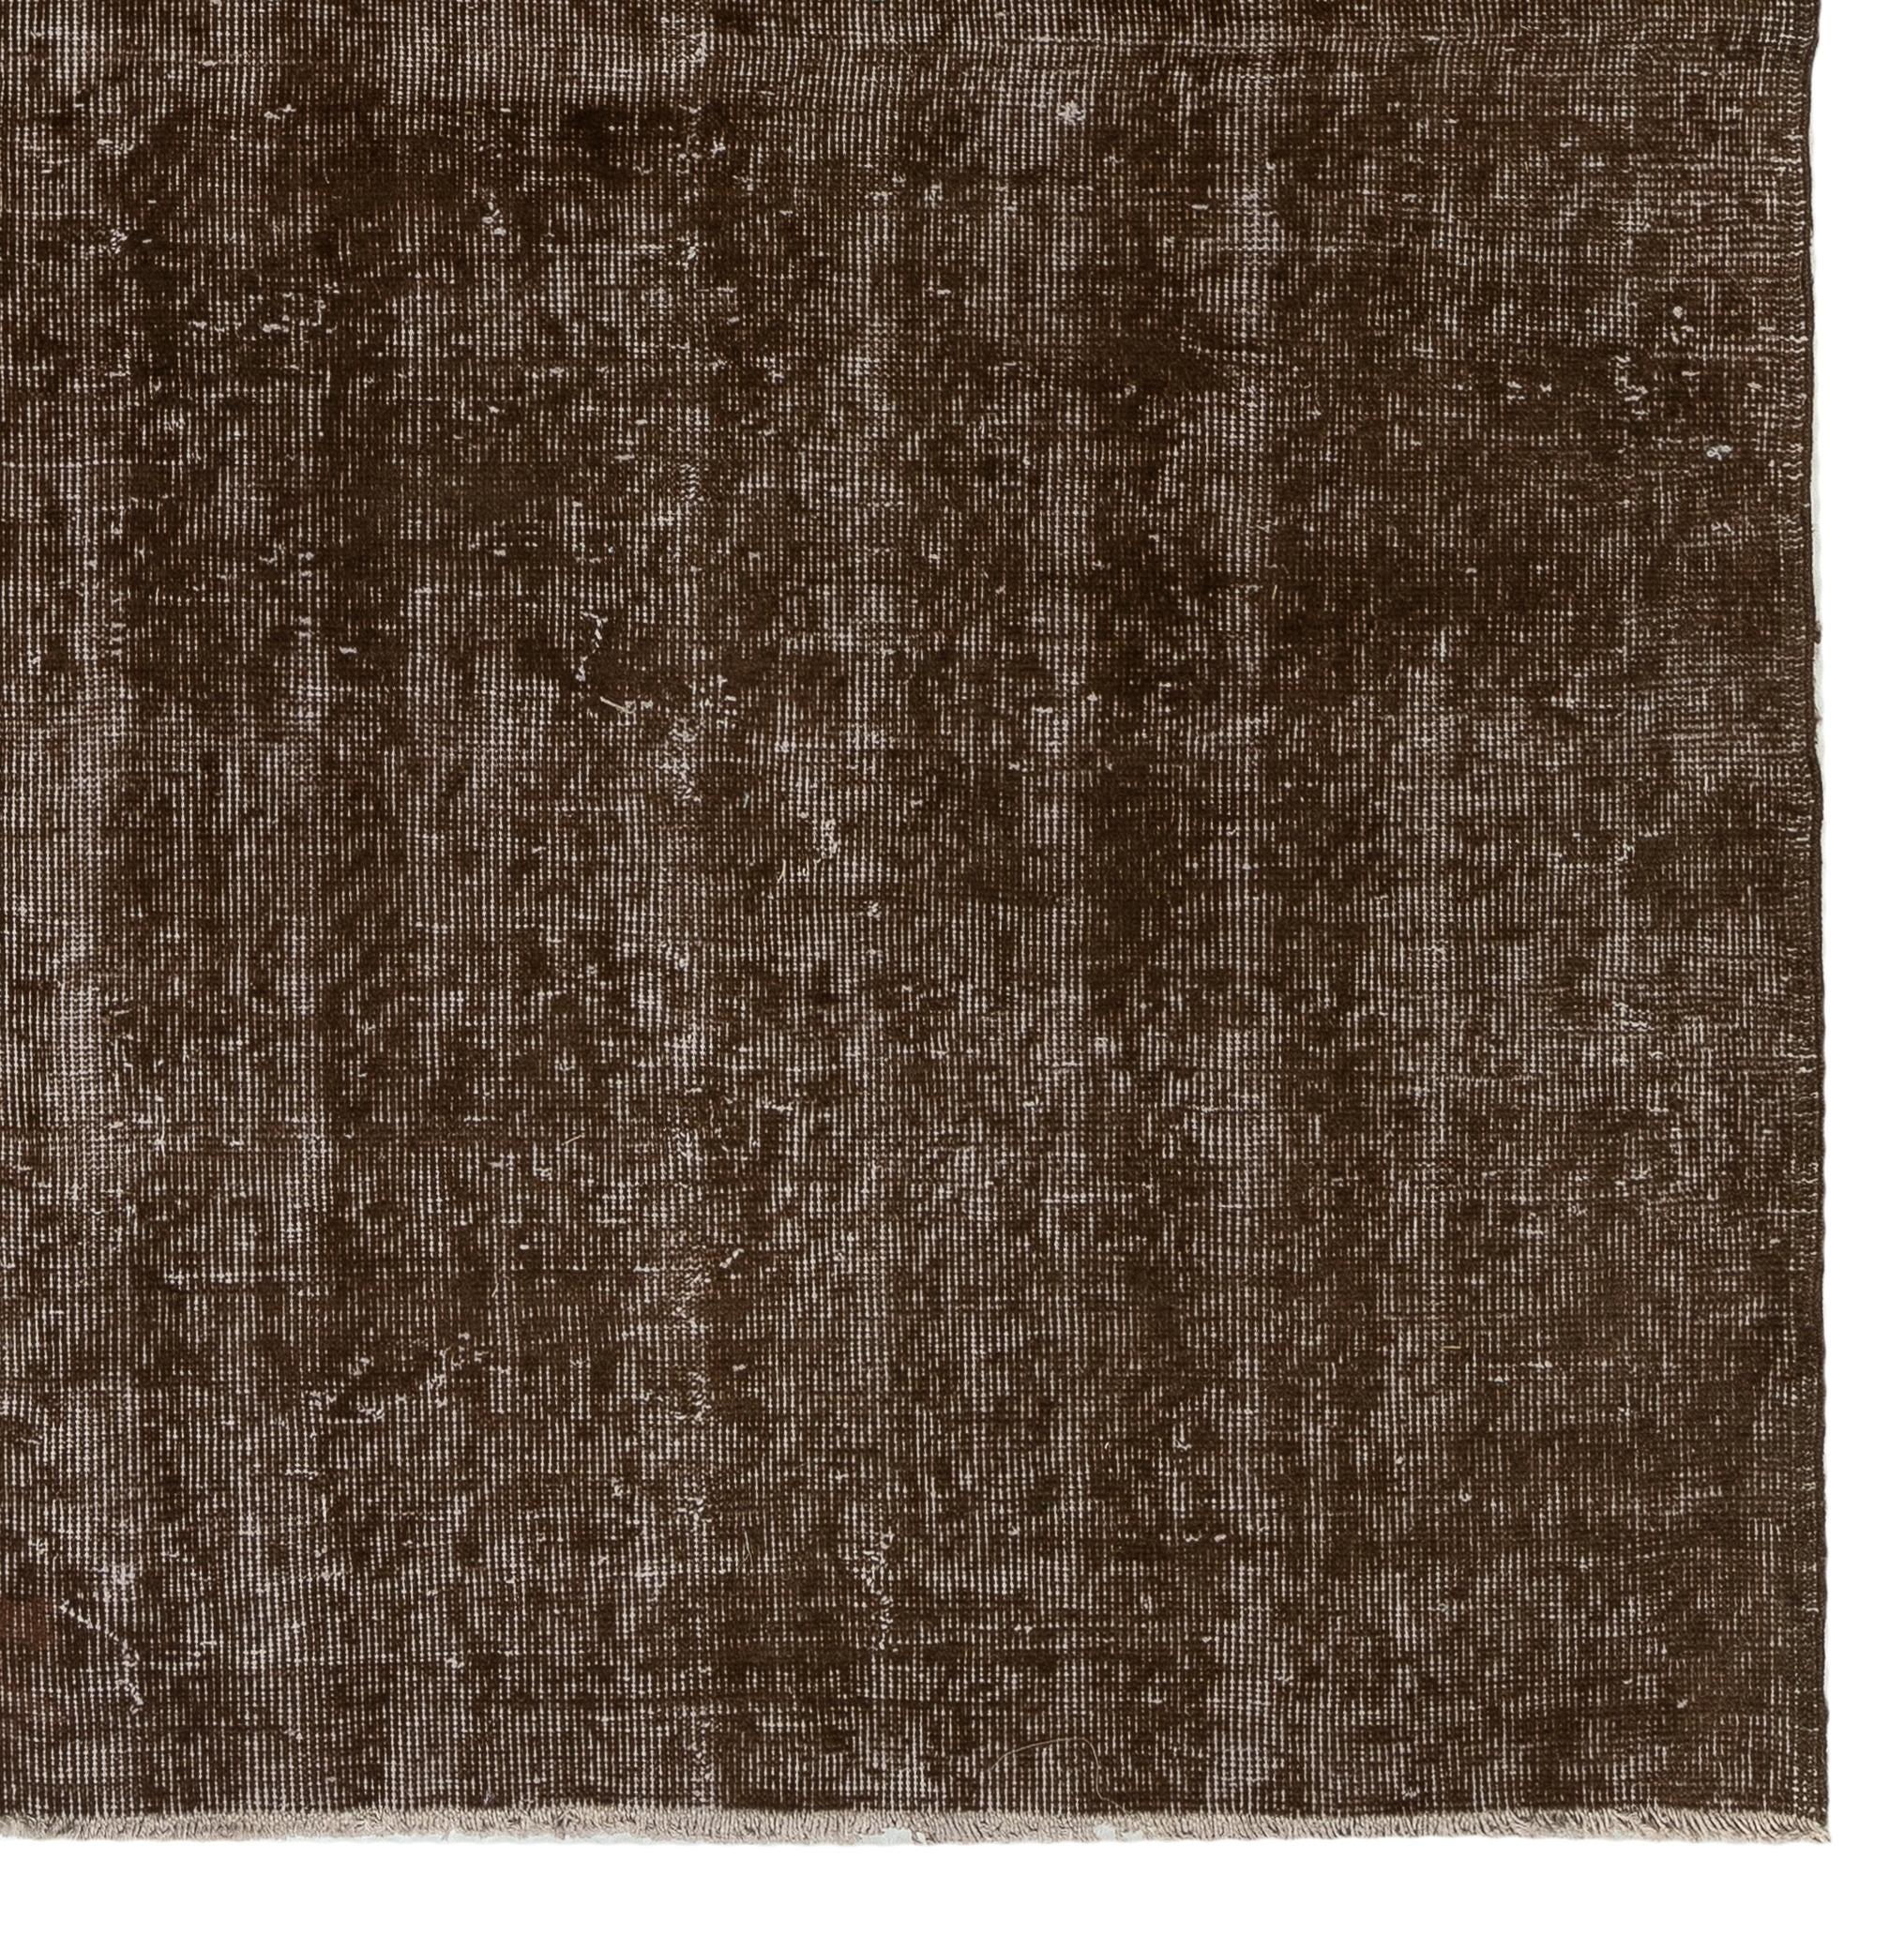 Hand-Woven 7.2x10.2 Ft Distressed Vintage Handmade Anatolian Rug Over-Dyed in Brown Color